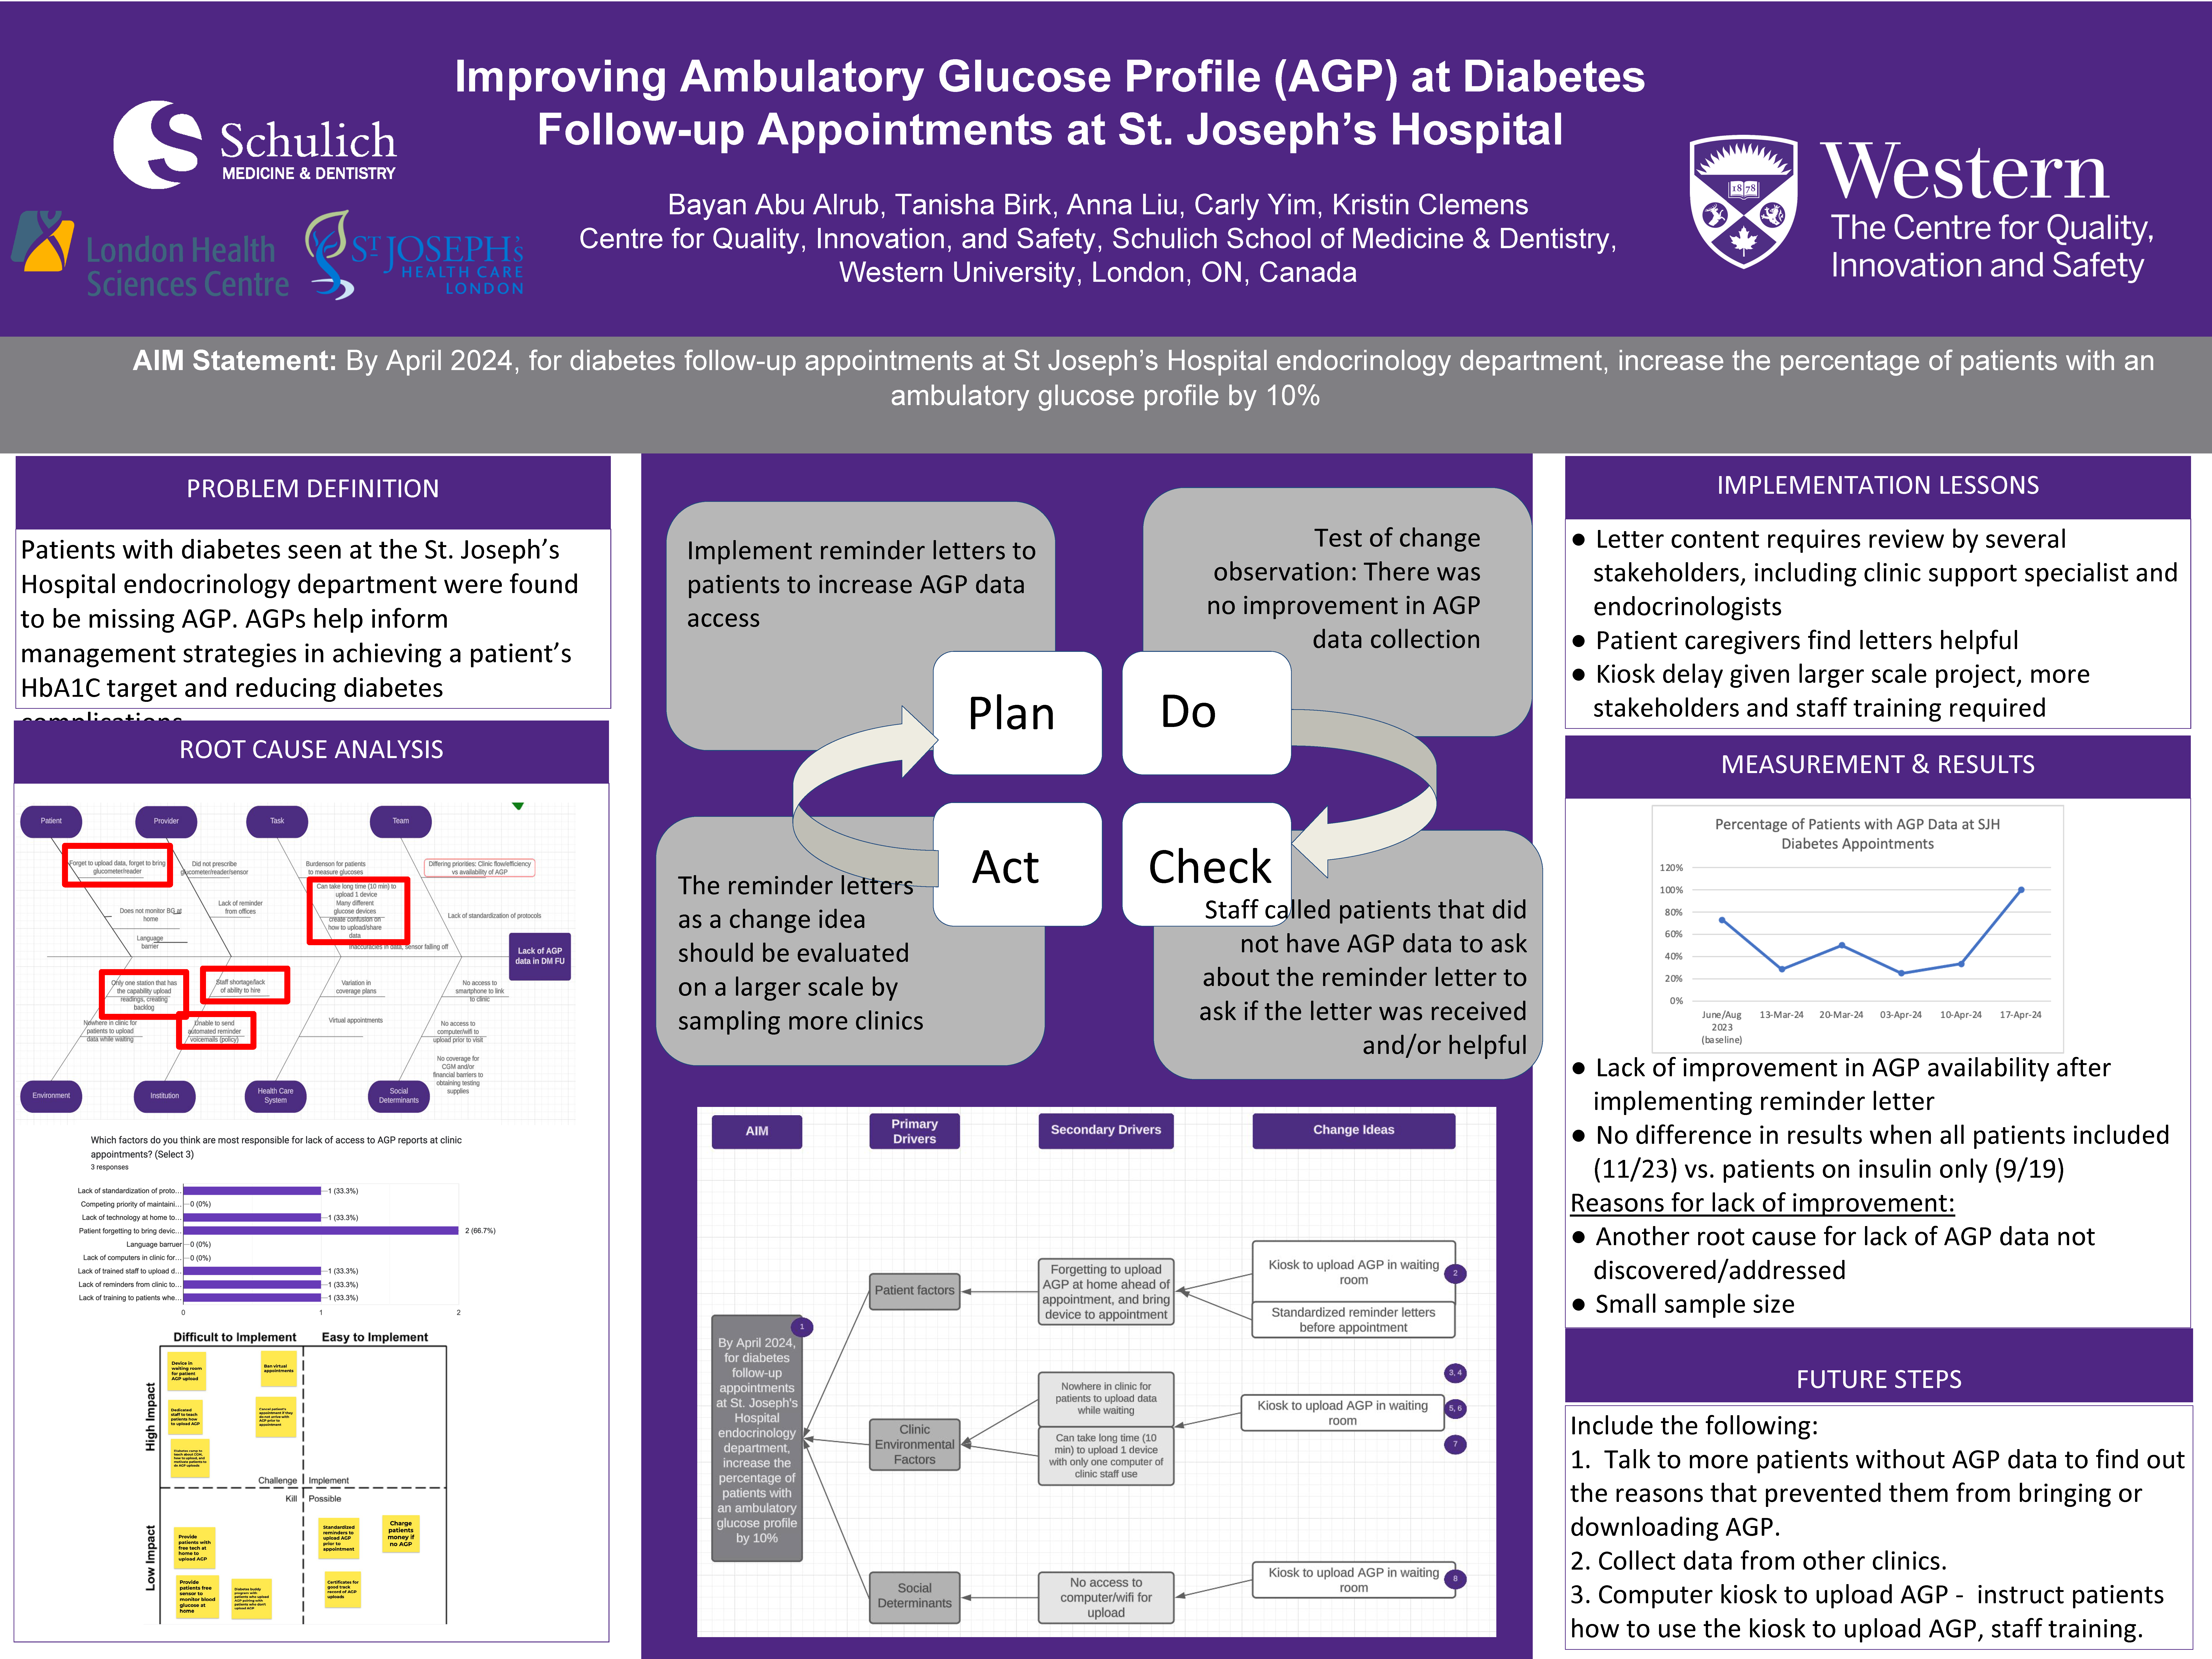 BISQ_2023-2024_Improving_Ambulatory_Glucose_Profile_(AGP)_at_Diabetes_Follow-up_Appointments_at_St._Joseph’s_Hospital_Poster.png